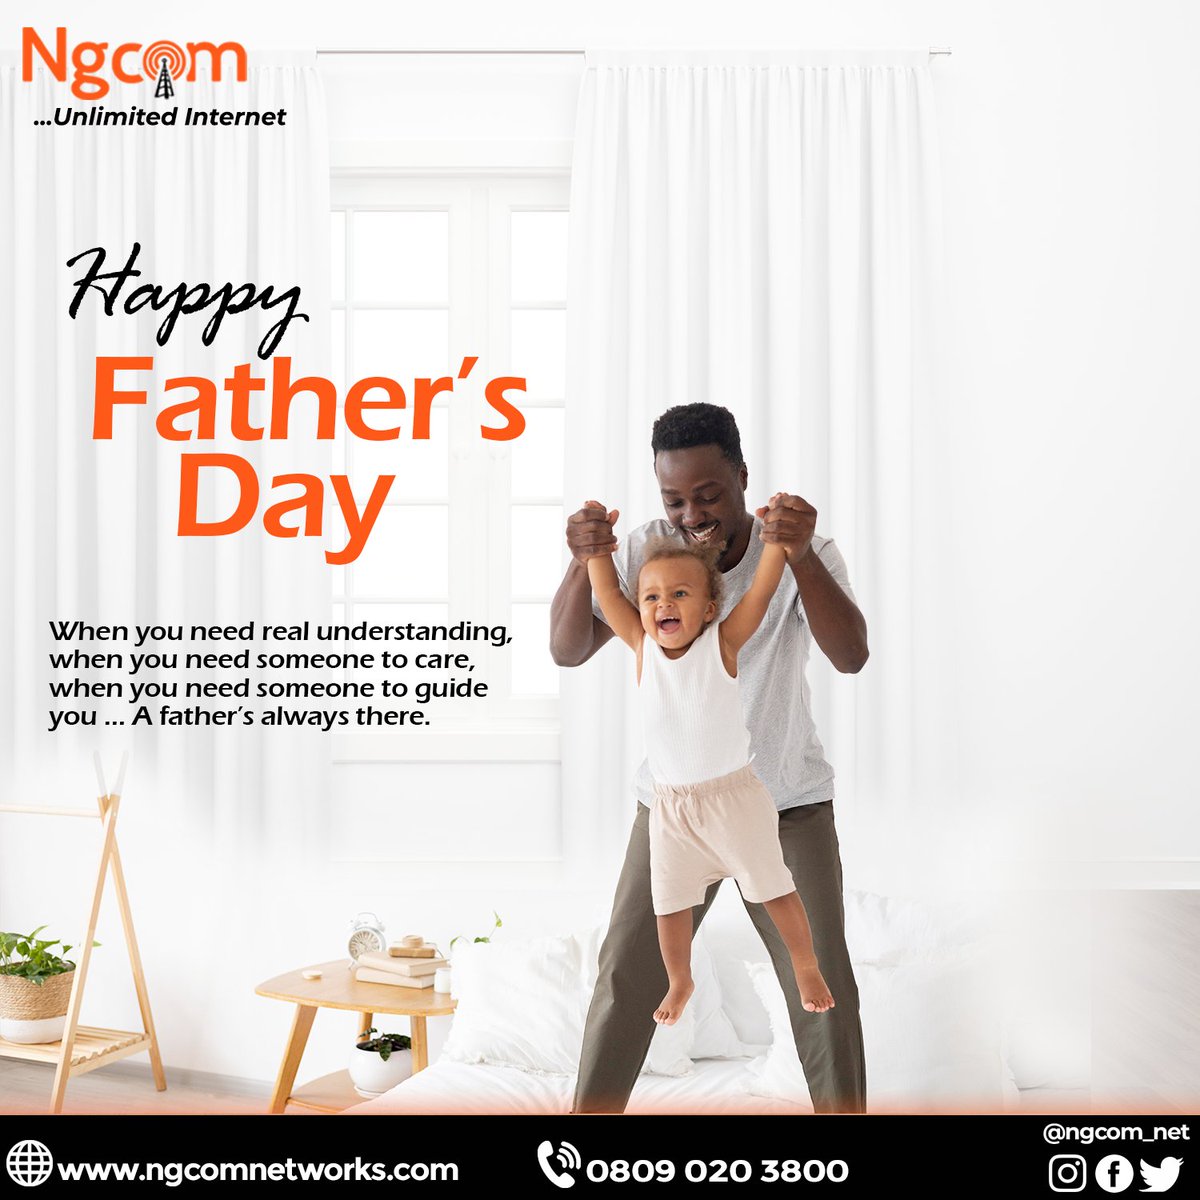 This father's day let's take a moment to appreciate the incredible dads who make our lives brighter and better.

#ngcom #technology #internetserviceprovider #NGCOMNetworks #friday #weekend #Unlimited_internet_in_Nigeria #tgif #friday #fun #fathersday #father #love